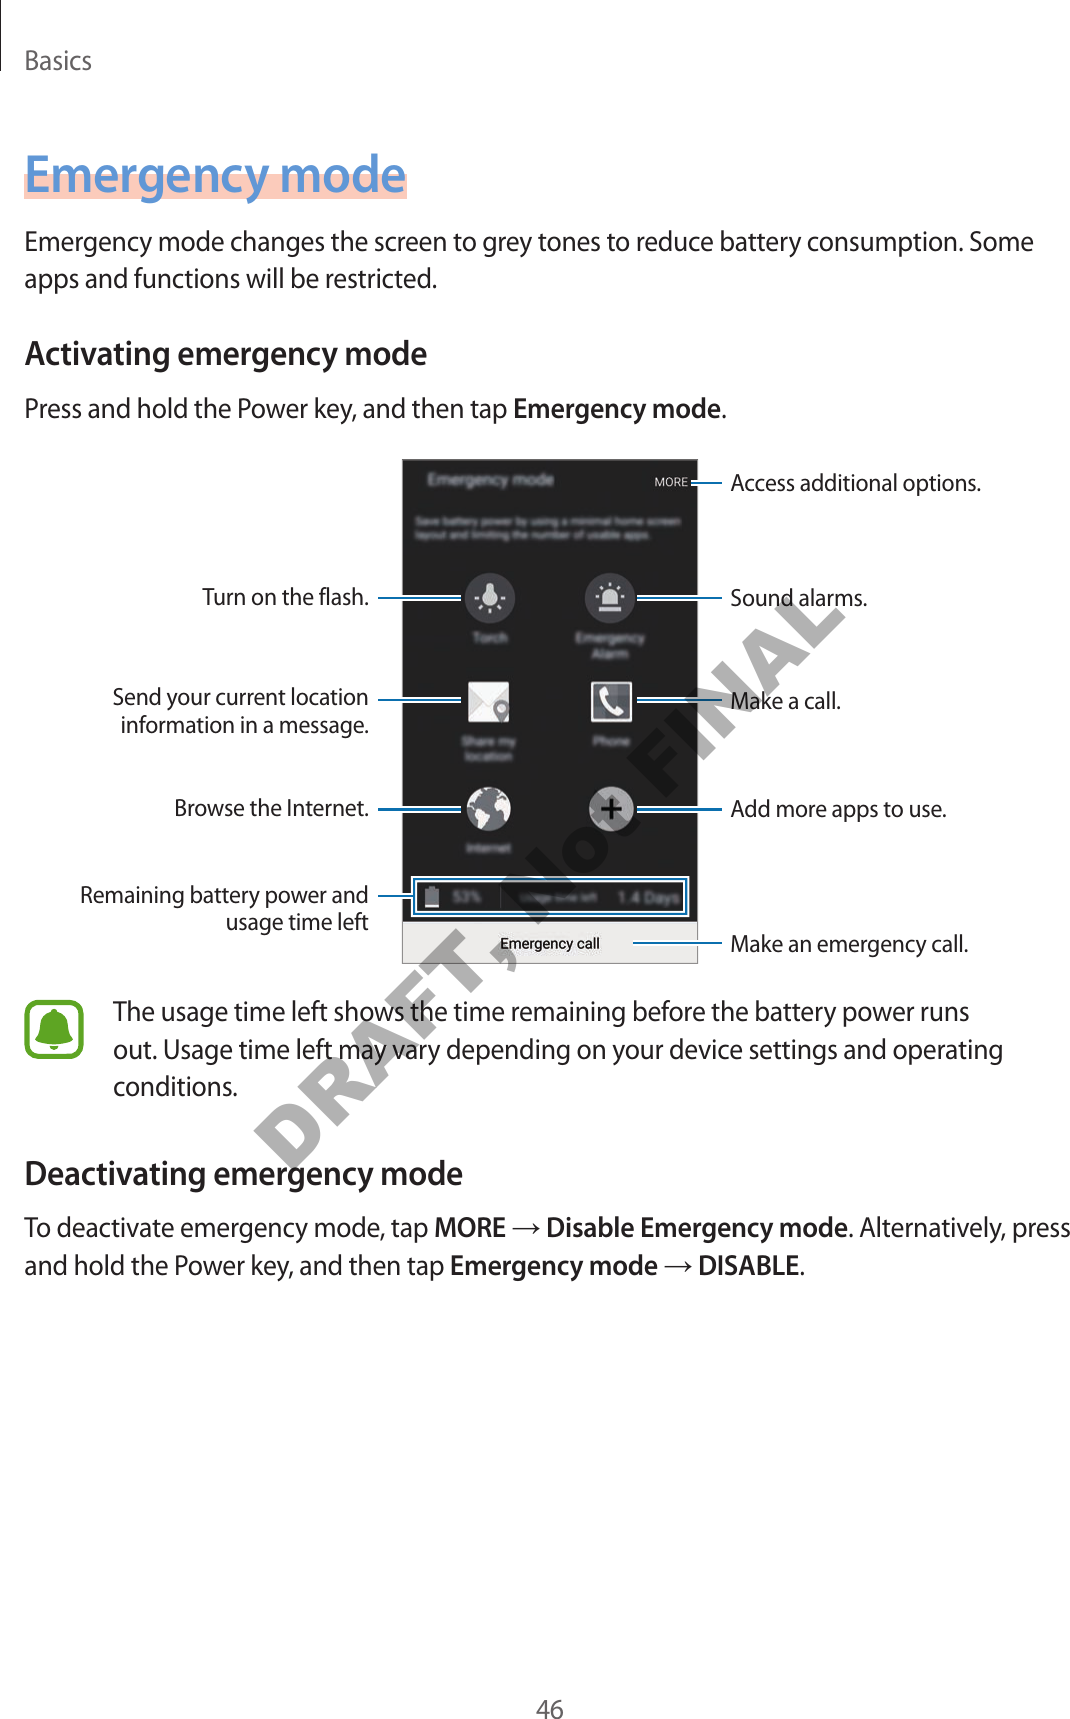 Basics46Emergency modeEmergency mode changes the screen to gr ey t ones to r educ e batt ery consumption. Some apps and functions will be restricted .Activating emer gency modePr ess and hold the Pow er key, and then tap Emergency mode.Add mor e apps to use .Make an emergency call.Remaining battery power and usage time leftTurn on the flash.Make a call.Send your current location information in a message .Brow se the Internet.Acc ess additional options .Sound alarms.The usage time left shows the time r emaining bef or e the batt ery power runs out. Usage time left may vary depending on your device settings and operating conditions.Deactiva ting emer gency modeTo deactivate emergency mode, tap MORE → Disable Emergency mode. Alternativ ely, pr ess and hold the P o w er key, and then tap Emergency mode → DISABLE.DRAFT, Not FINAL